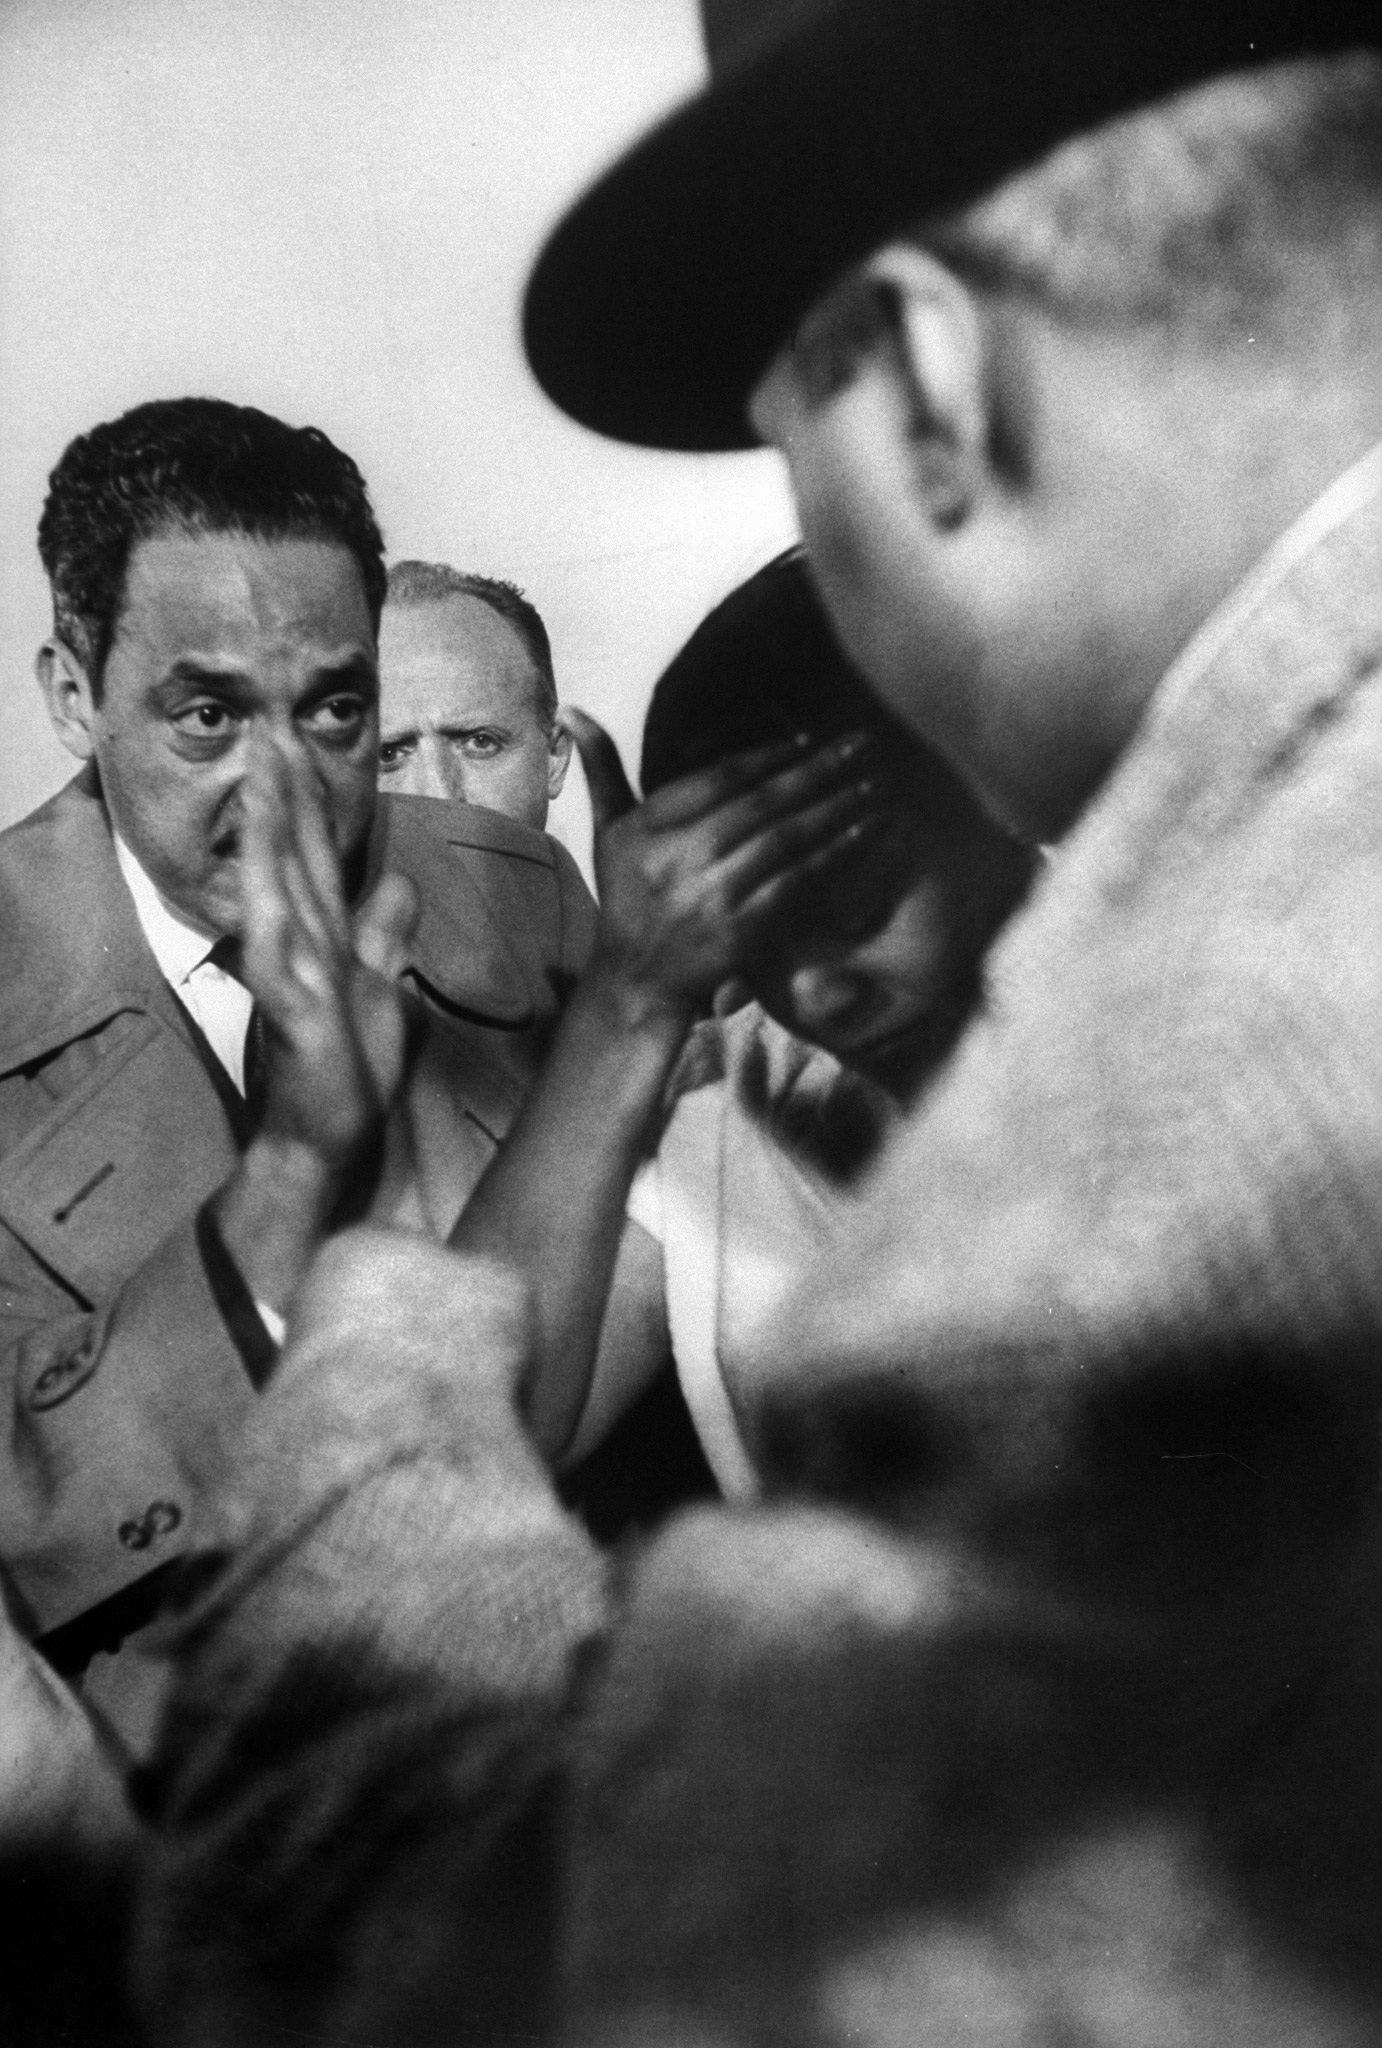 Distraught Autherine Lucy, meeting with the press, as Attorney Thurgood Marshall (L) waves them away, 1956.